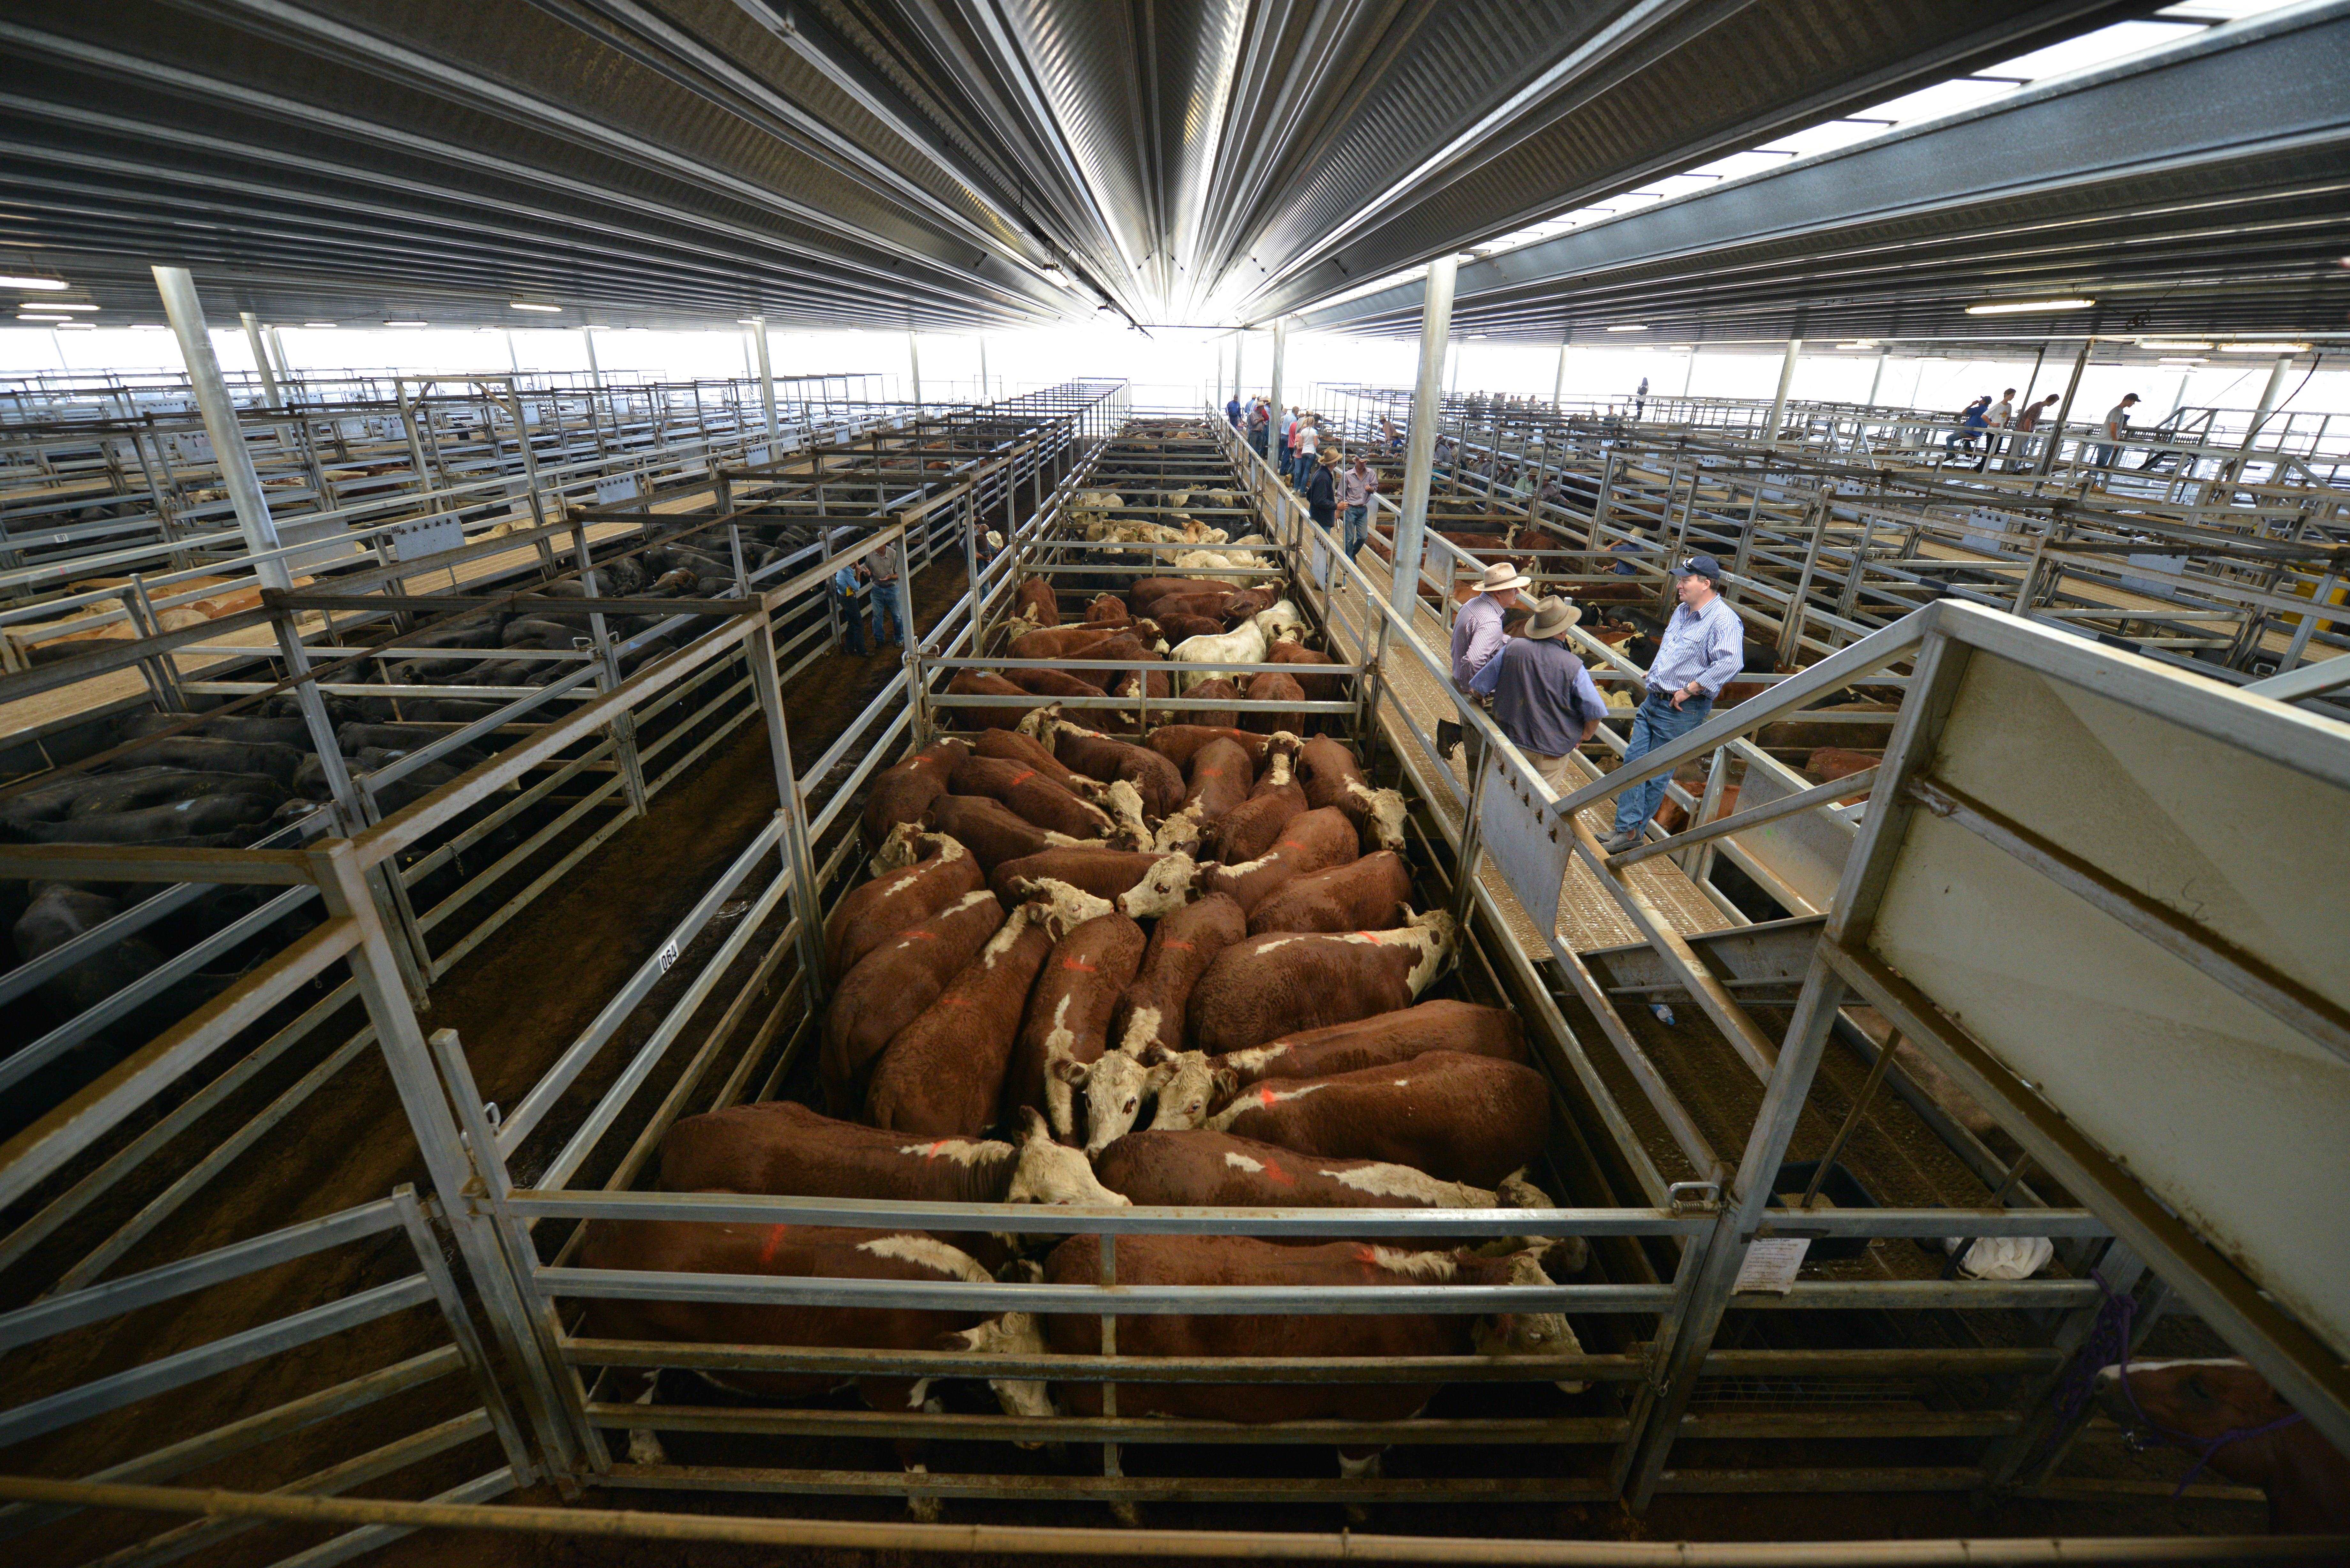 (FILES) In this file photo taken on February 10, 2015, farmers (R) look at cattle at the weekly livestock sale near the town of Carcoar in central-west New South Wales. Australia on November 19, 2015 blocked the sale of one of the world's largest cattle estates to foreign entities, ruling it was not in the national interest with part of the holdings in a weapons testing area. AFP PHOTO / Peter PARKS / FILES